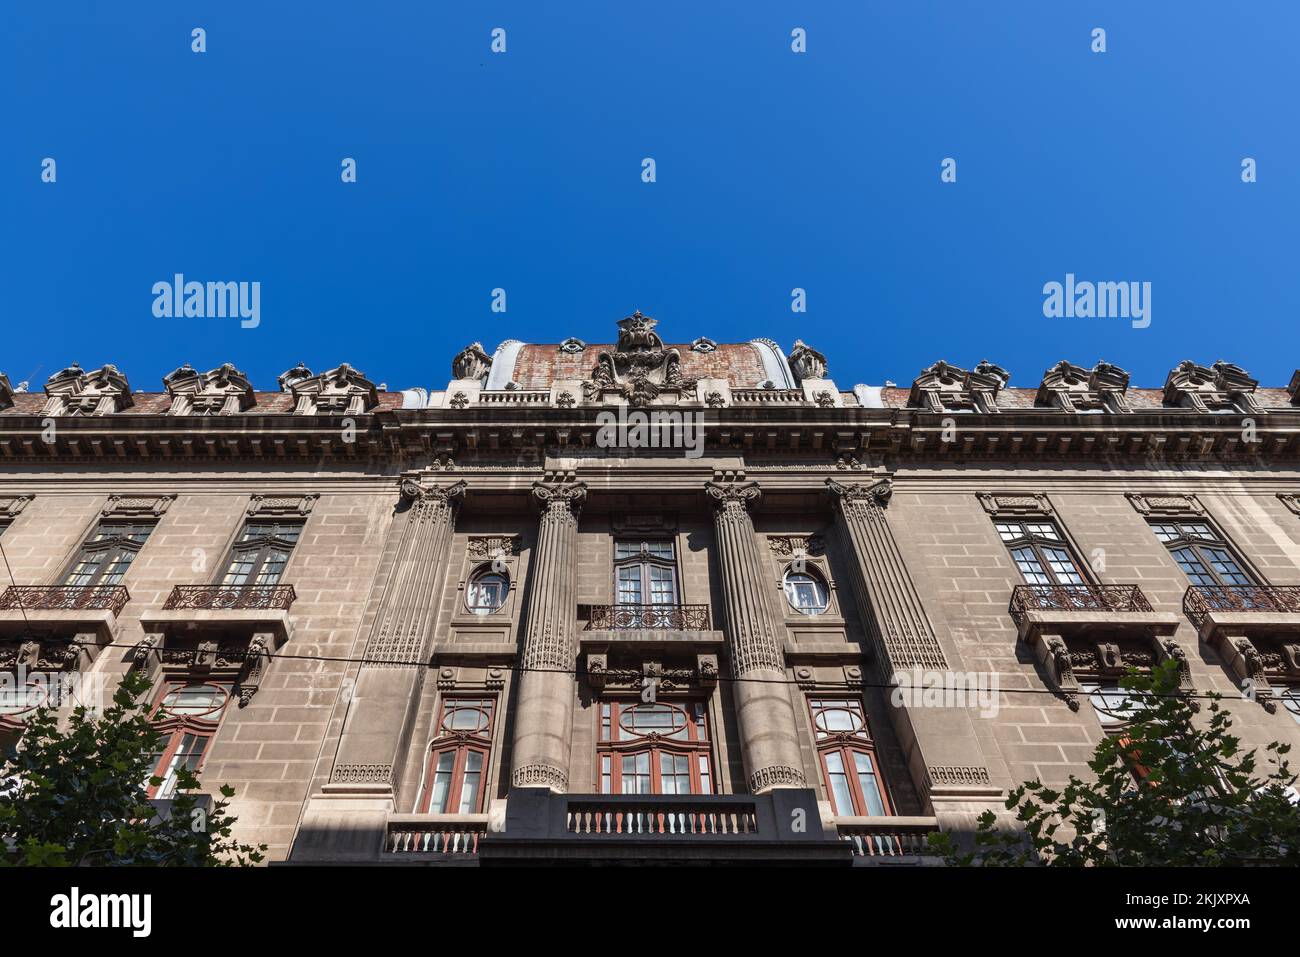 Historical building on Strada Ion Ghica 4 famously known as Bucharest Stock Exchange Palace features an eclectic style with neoclassical influences. B Stock Photo